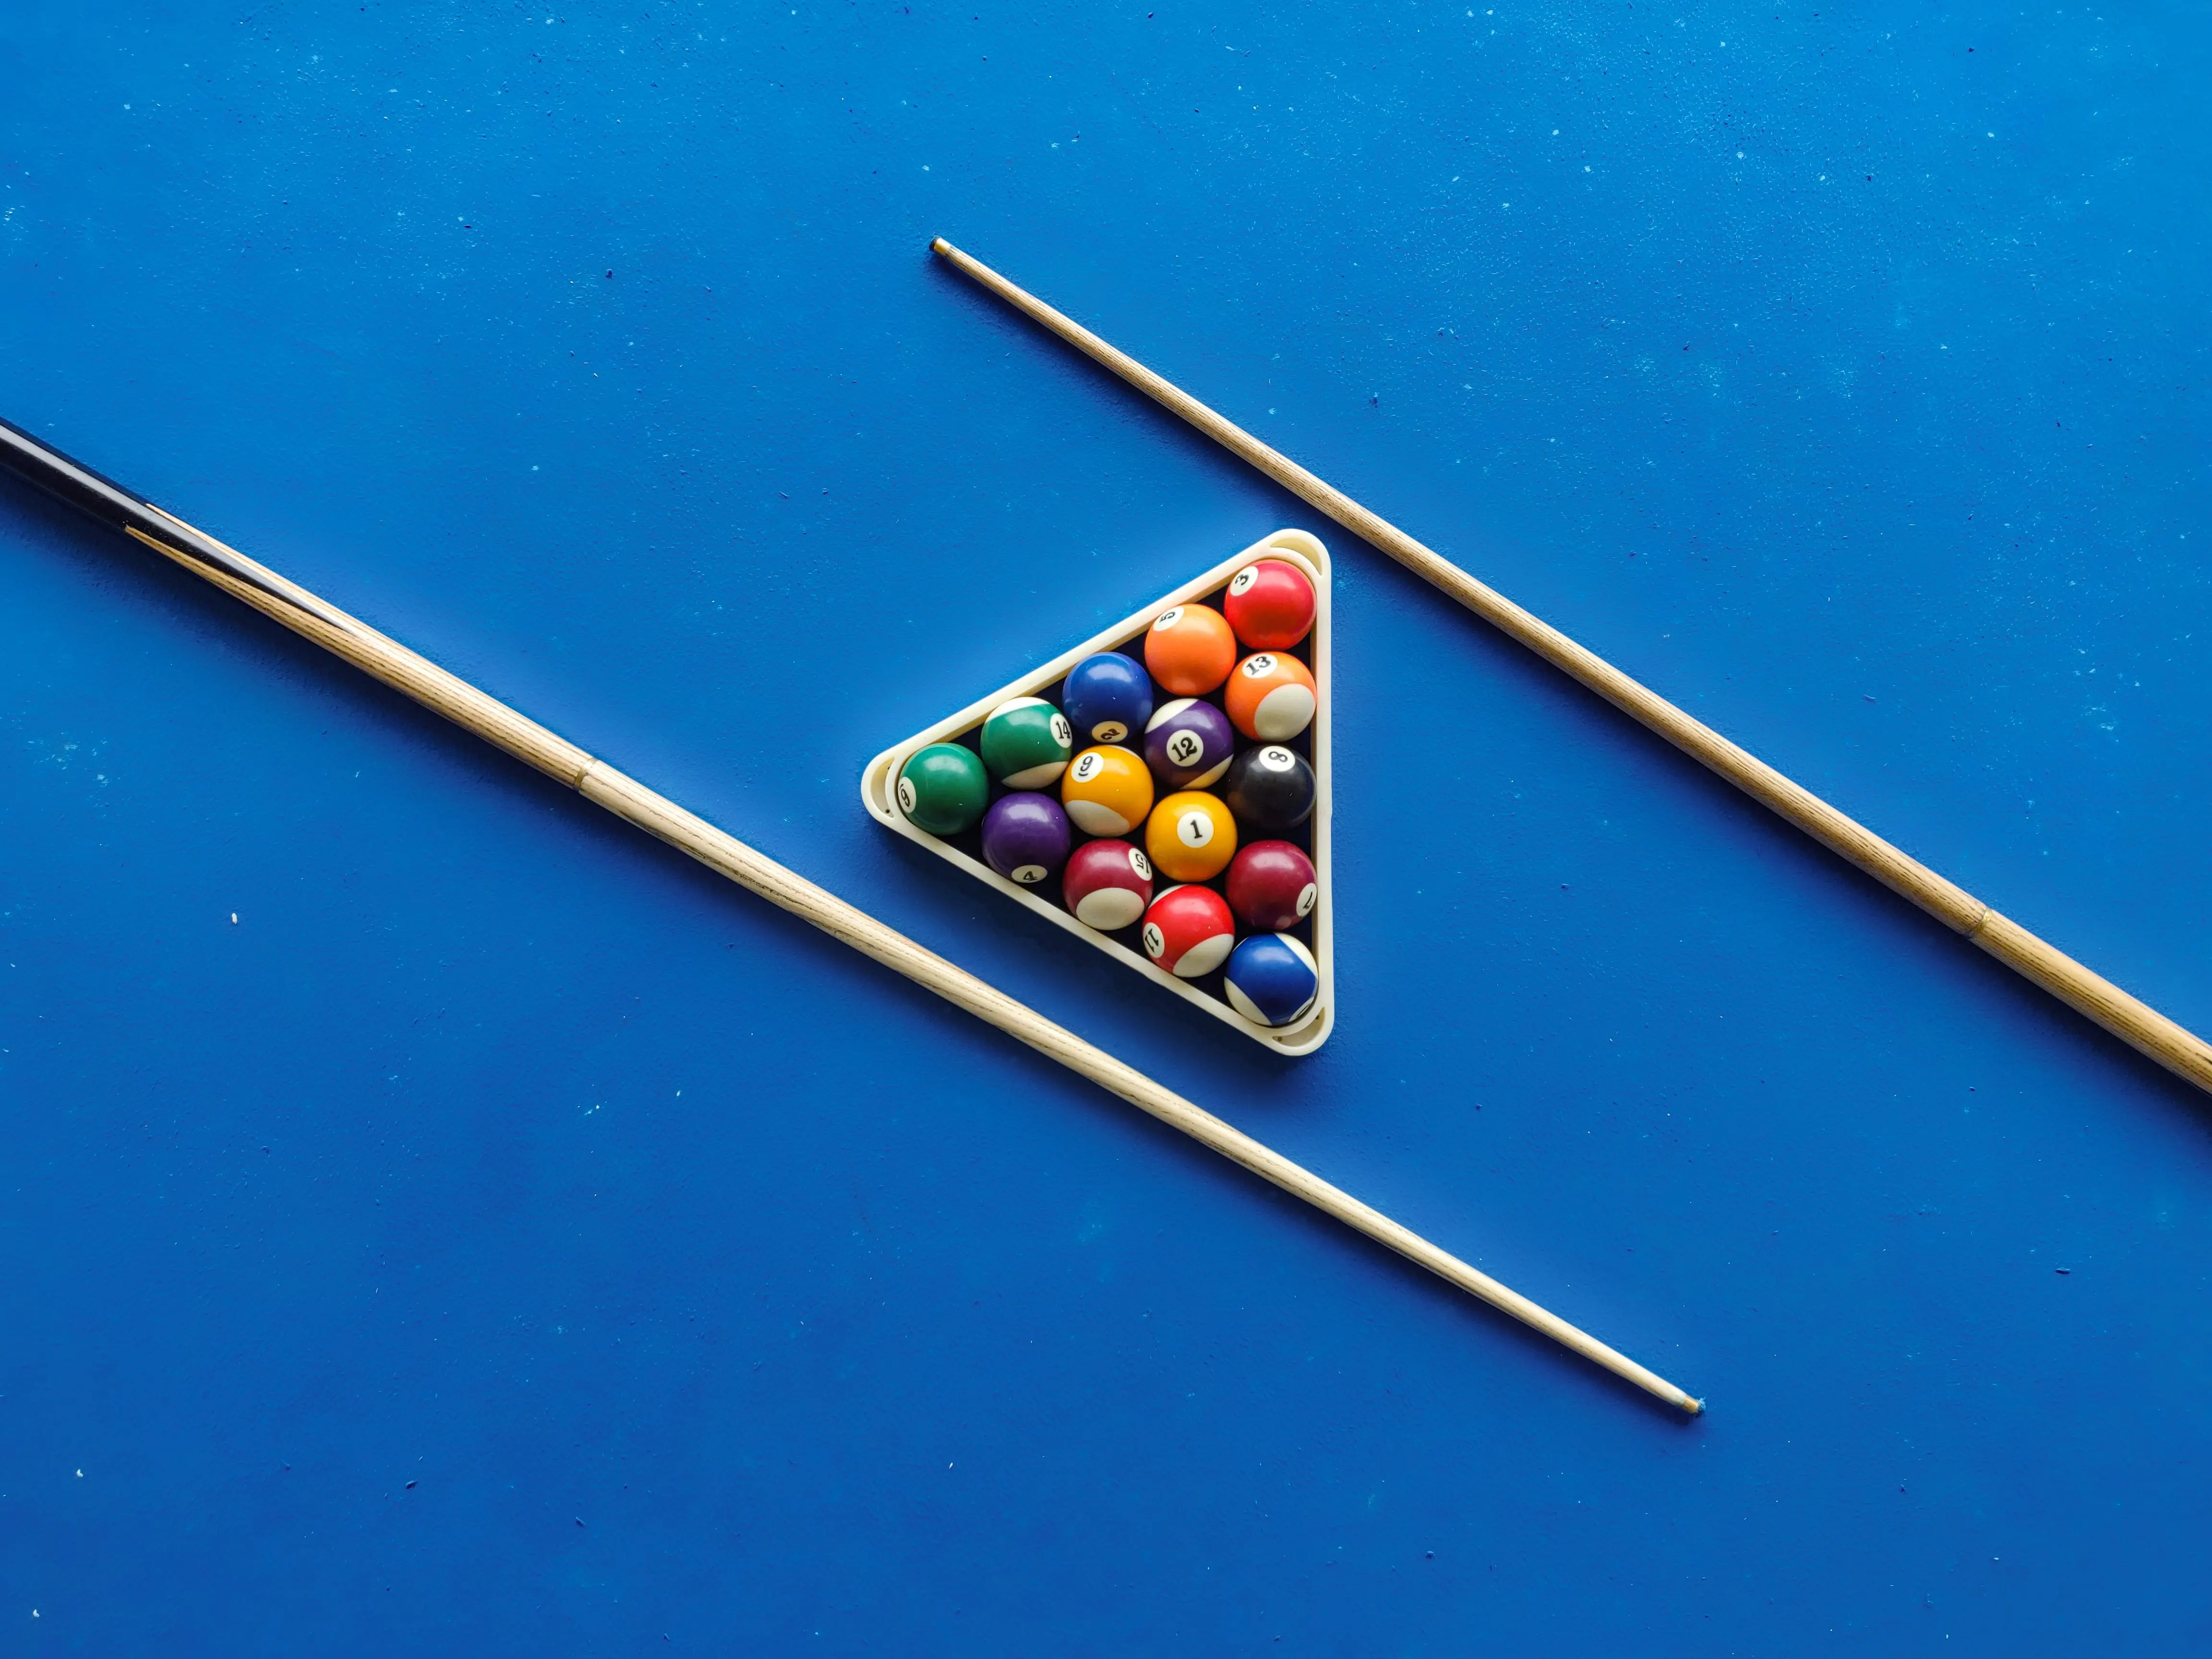 Cue sticks crossed on a billiards table with cue ball and racked billiard balls